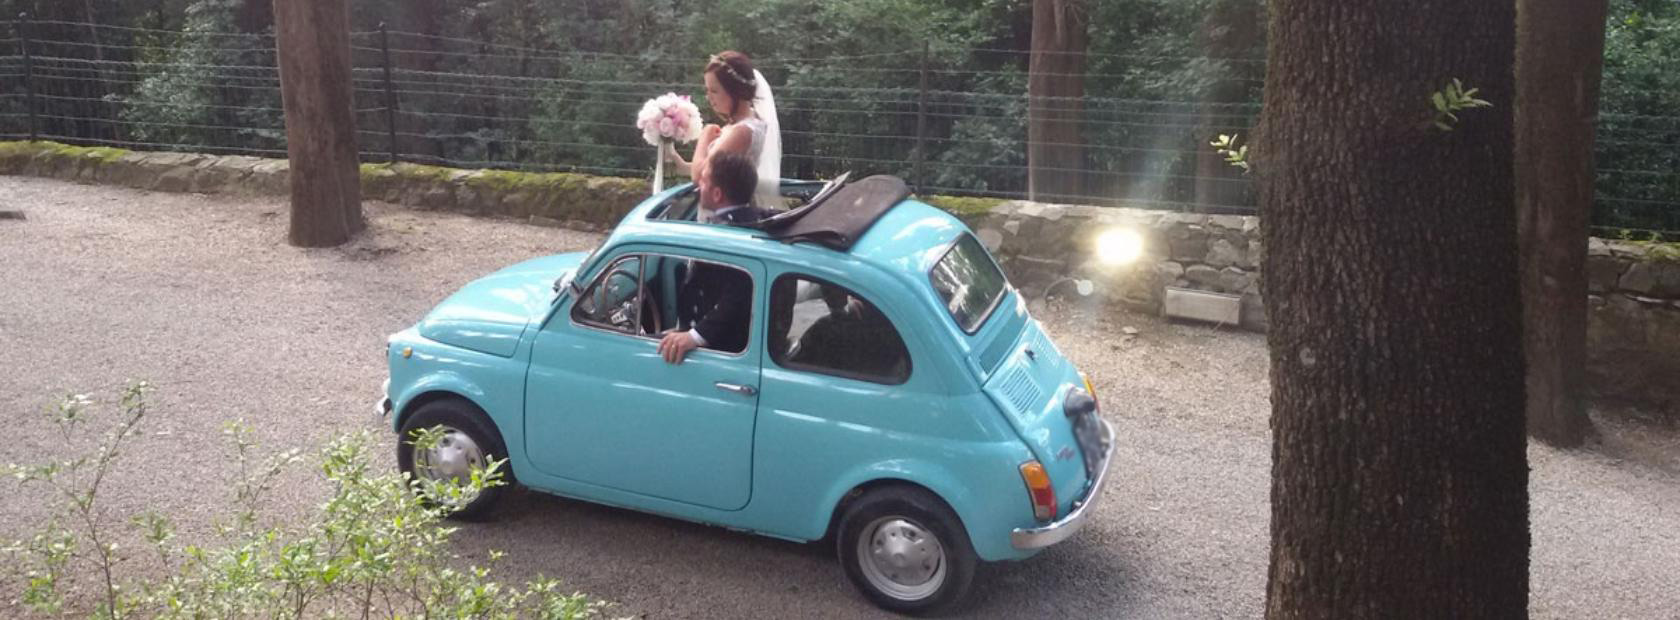 Fiat 500 1970s rental for tours and weddings in Cortona